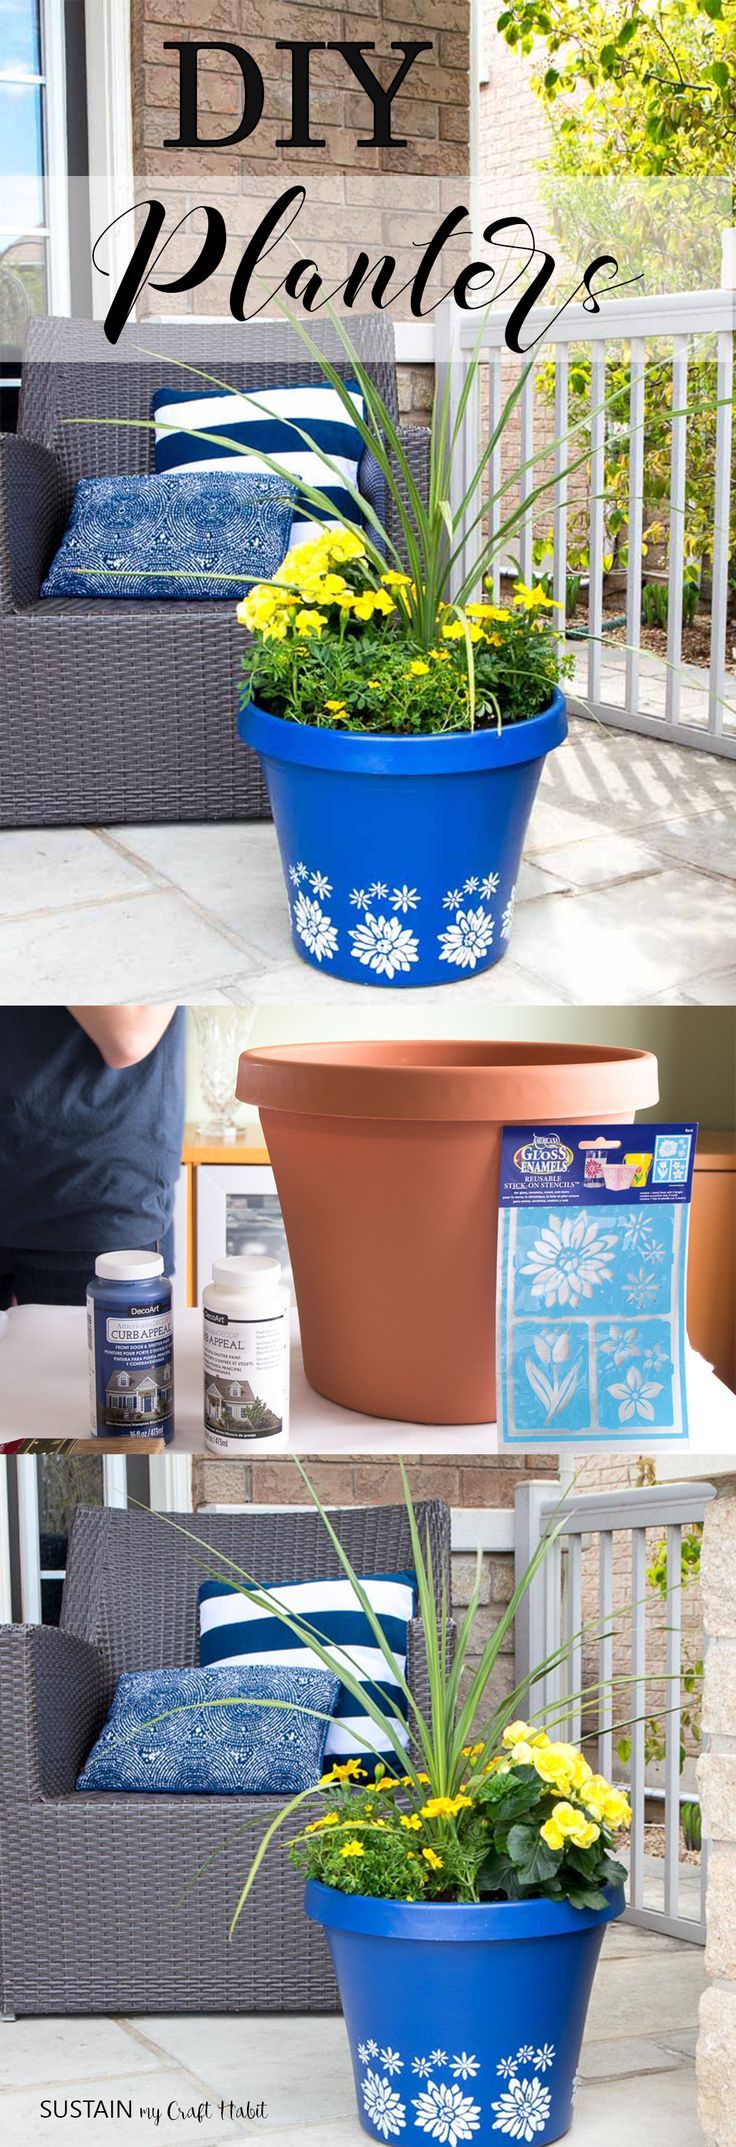 Filling your front porch with pretty planters doesn't need to cost a ton! Transf...